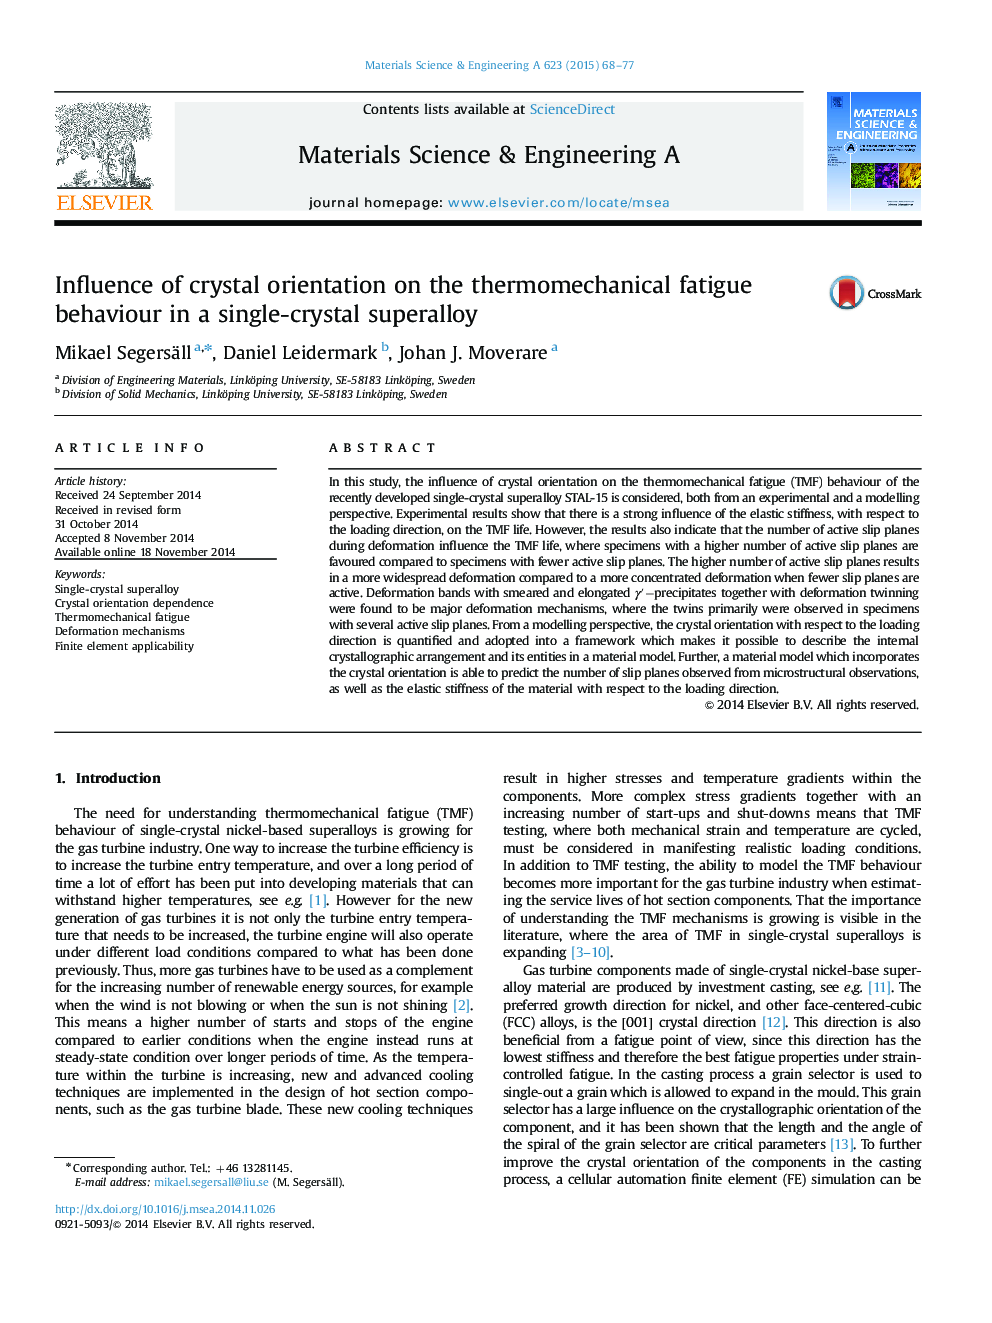 Influence of crystal orientation on the thermomechanical fatigue behaviour in a single-crystal superalloy